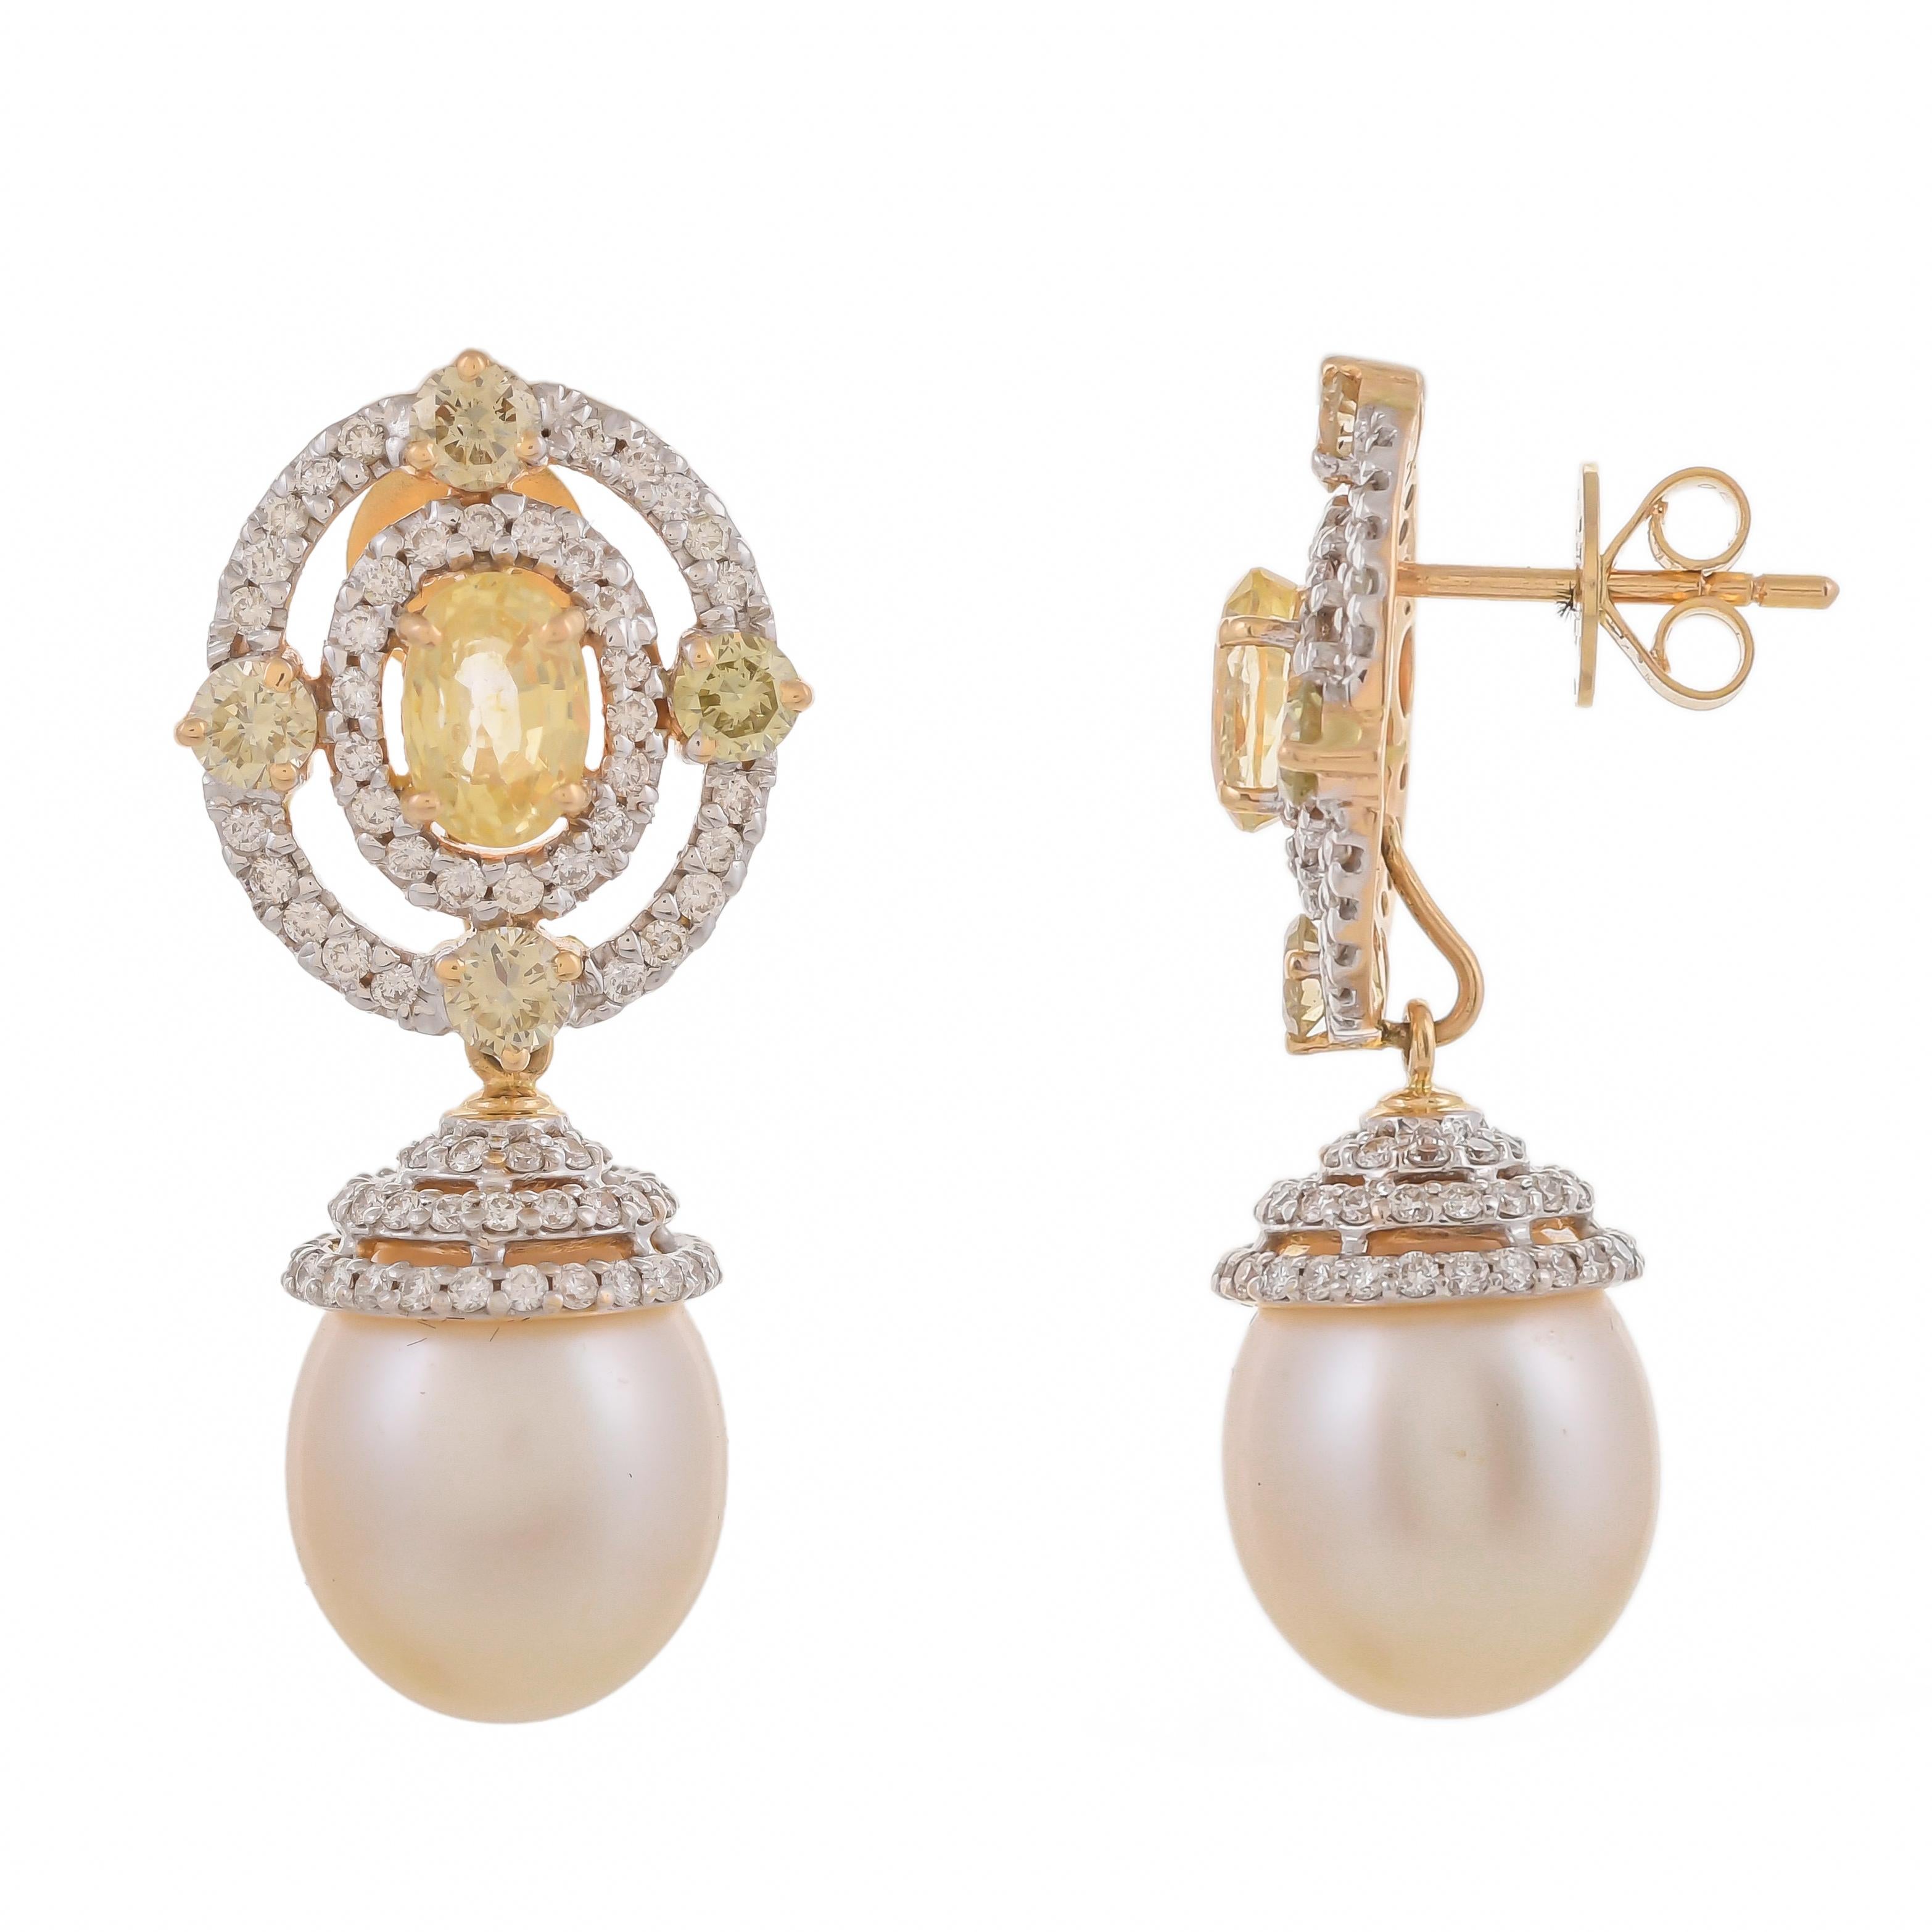 A detachable 18 karats yellow gold earring with a fine oval-shaped sapphire at the centre. The centre stone has an immediate surround of full-cut diamonds and an extended surround of round-shaped yellow sapphire further suspended with South Sea